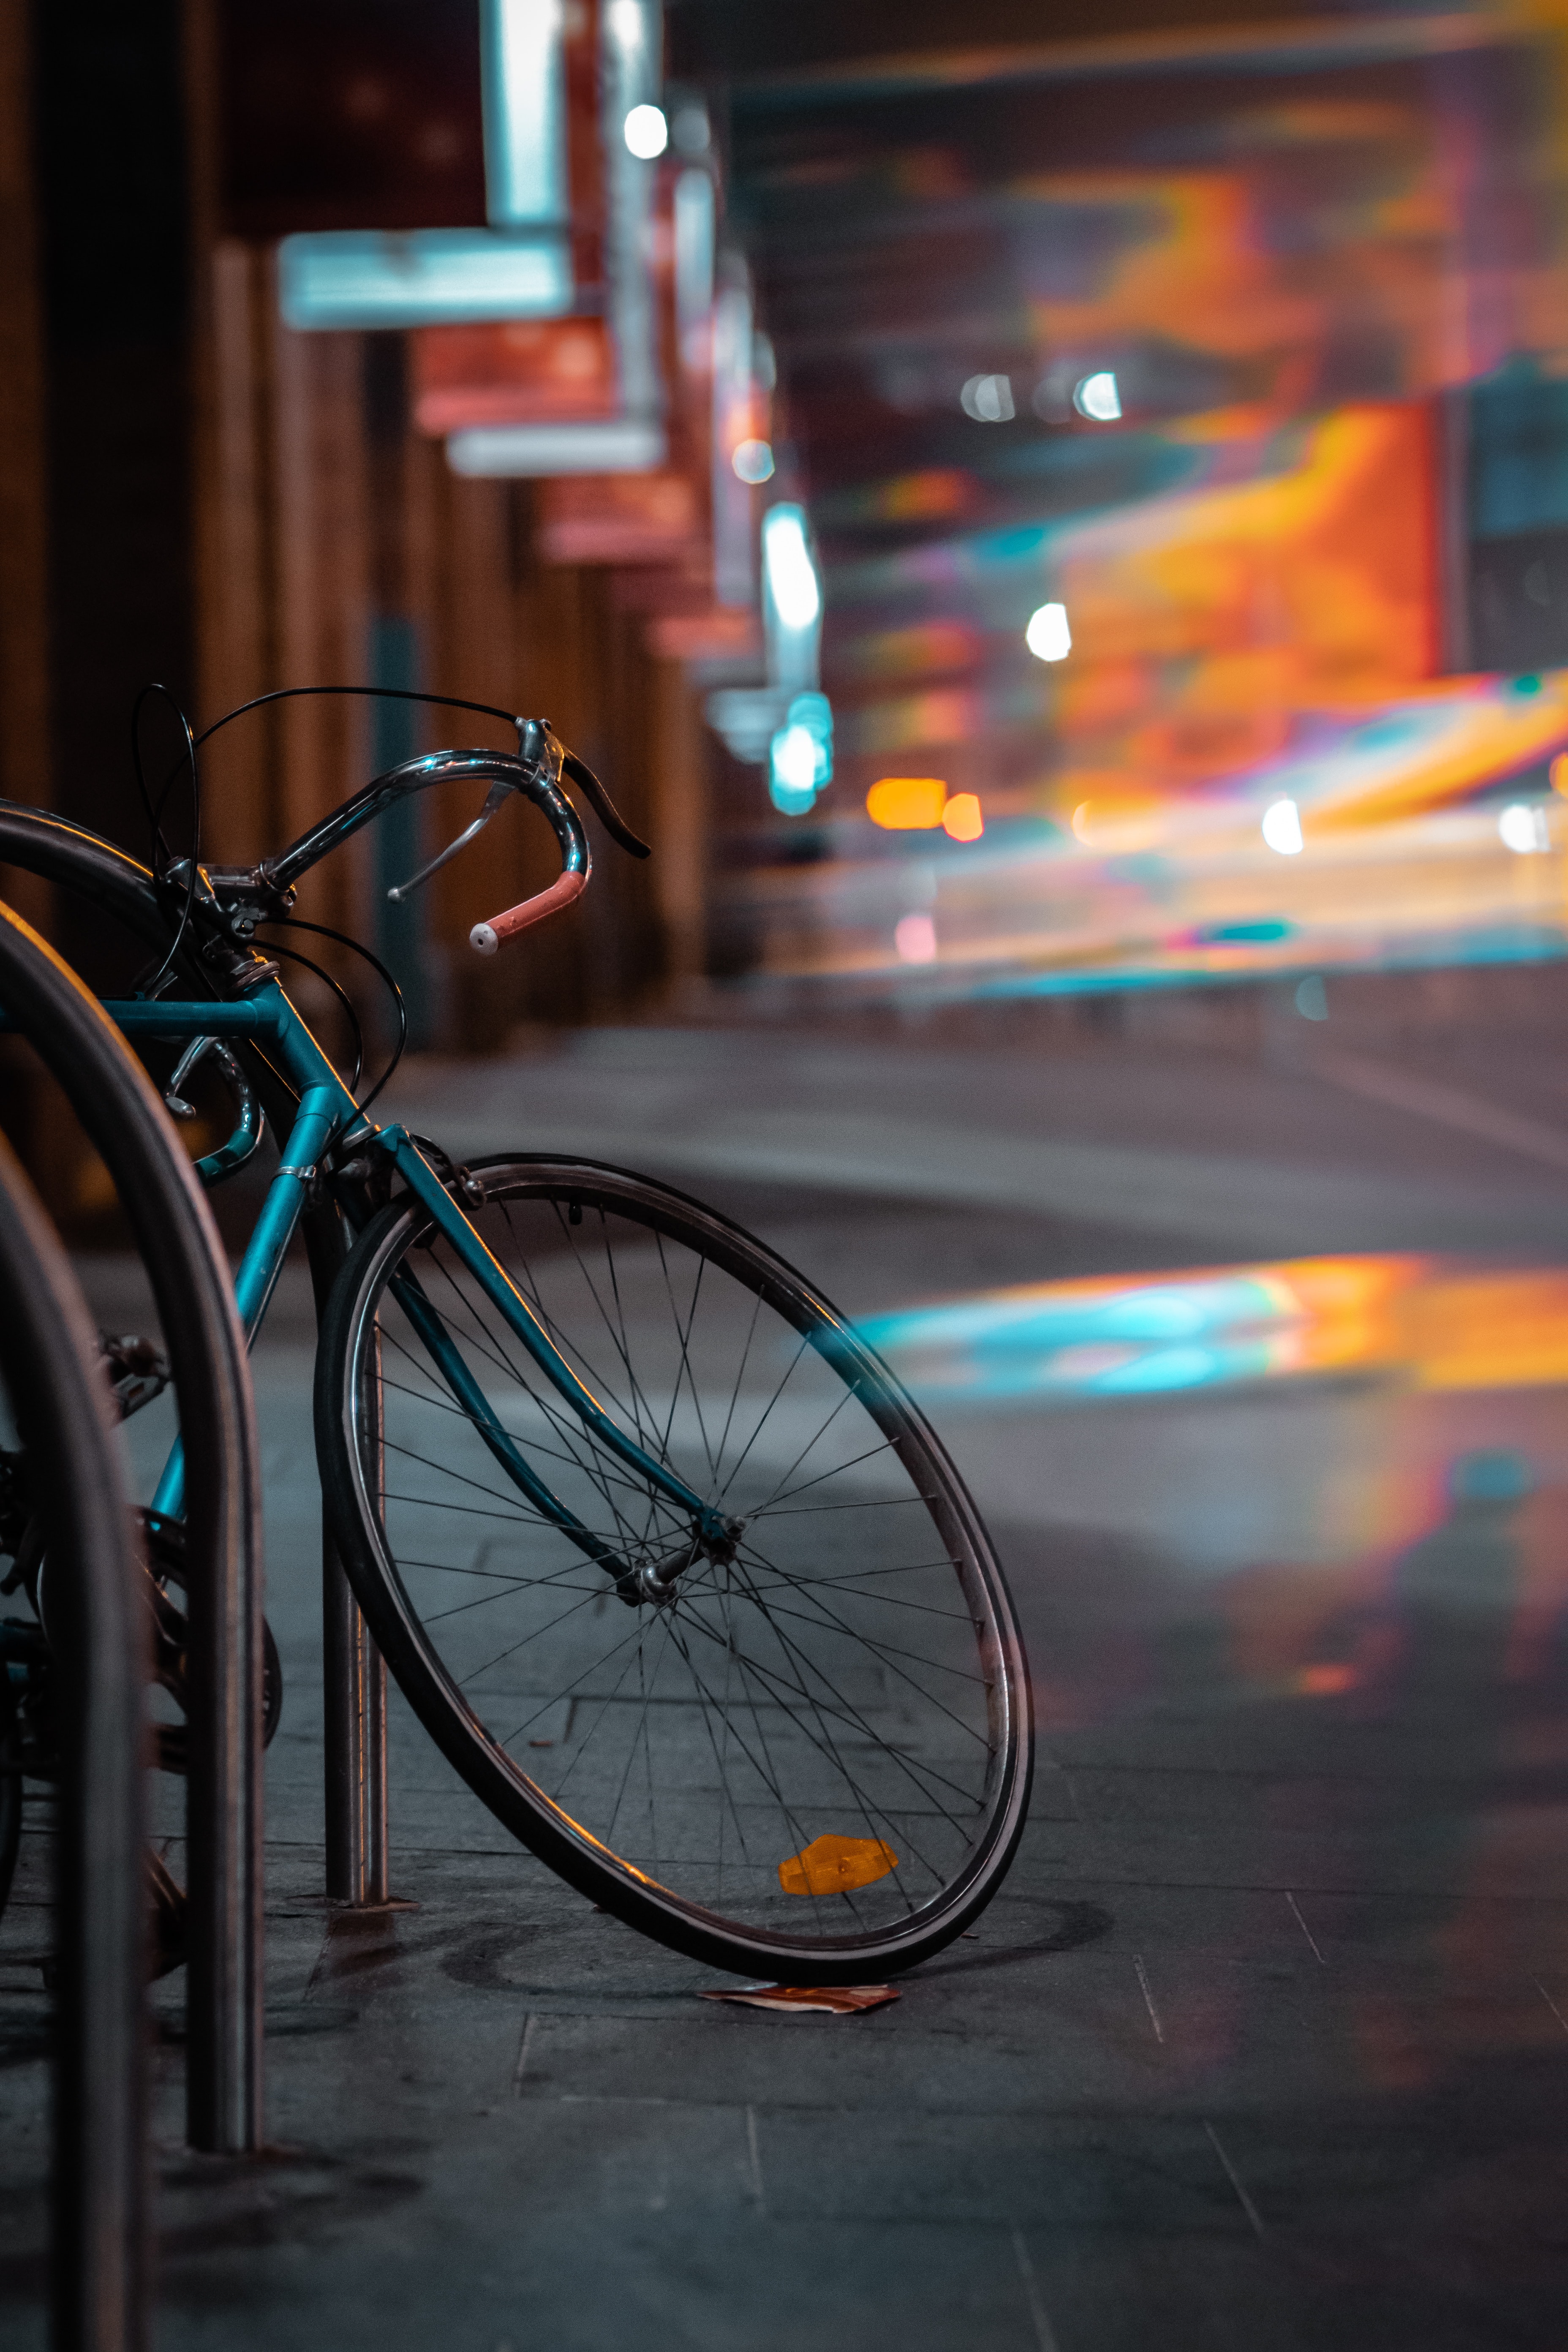 Free HD blur, miscellaneous, bicycle, transport, glare, miscellanea, smooth, evening, wheels